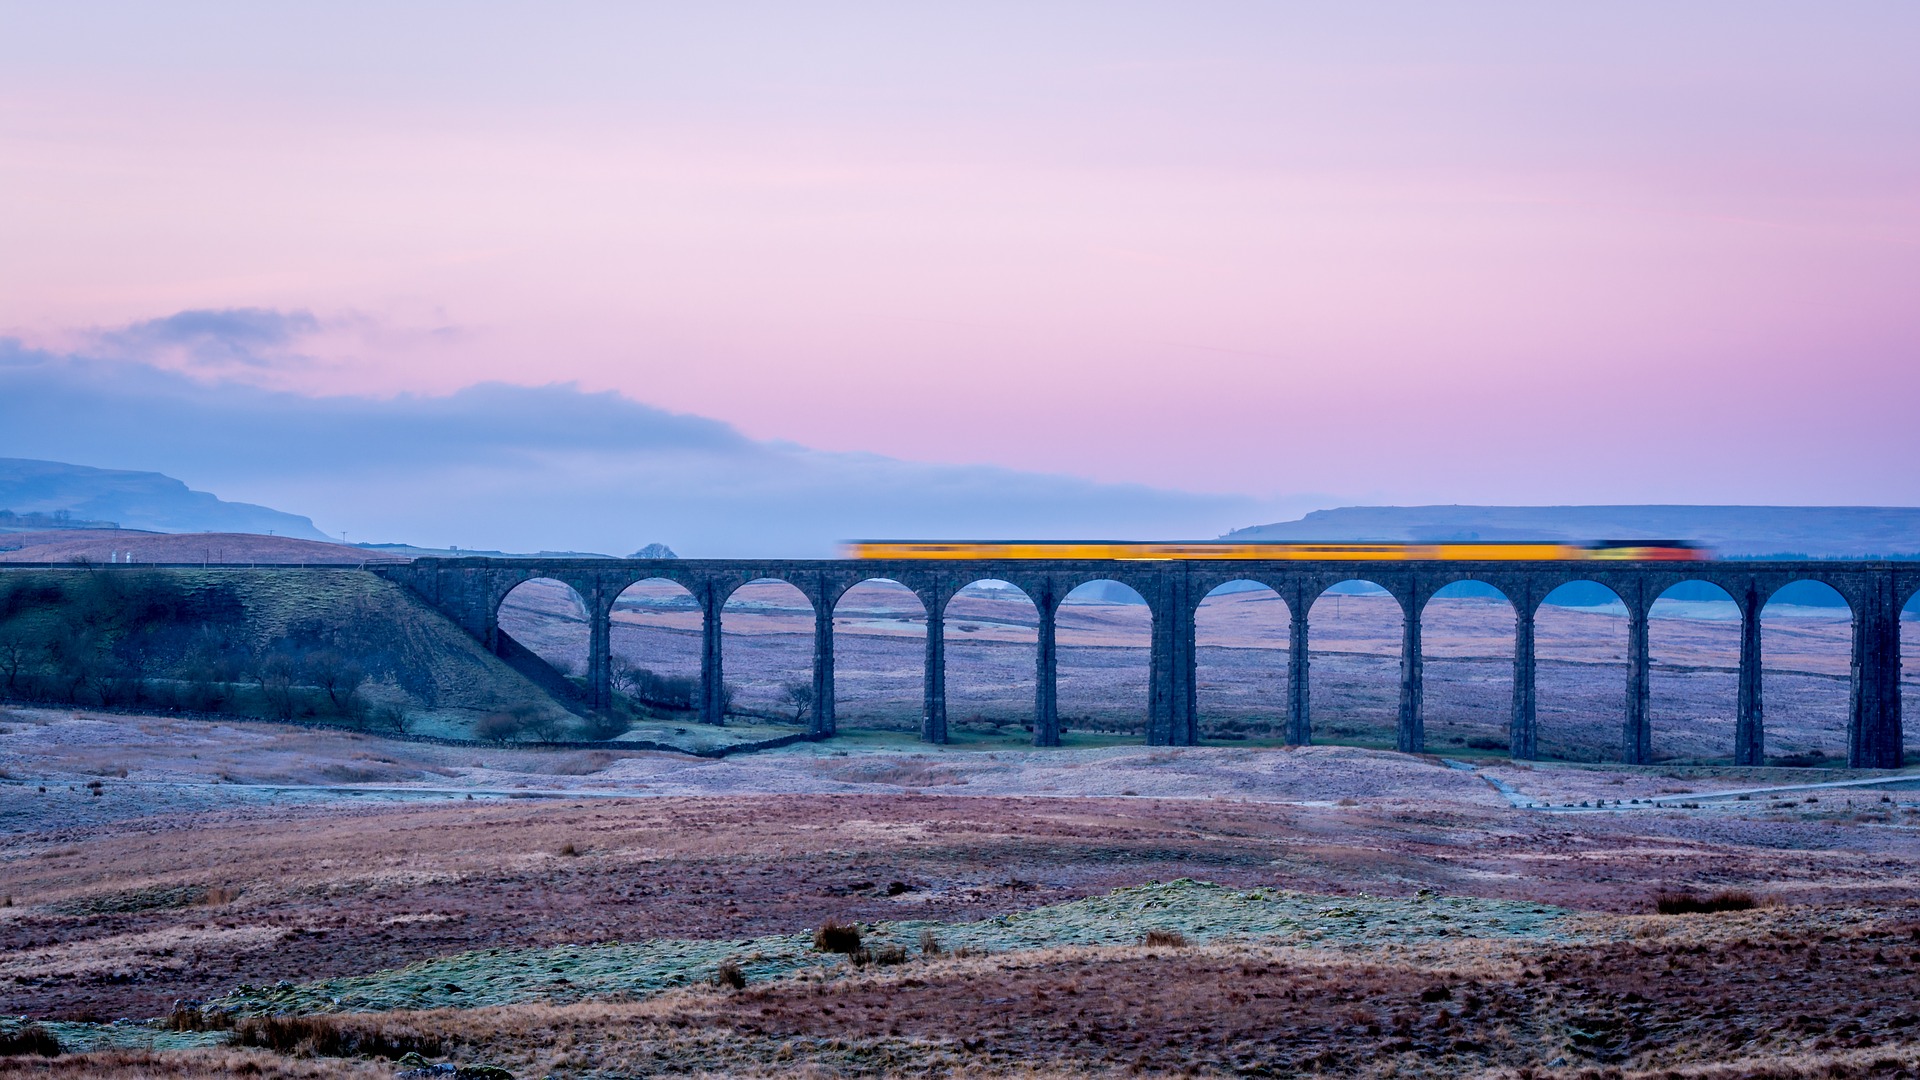 A train runs across a viaduct in the Yorkshire Dales